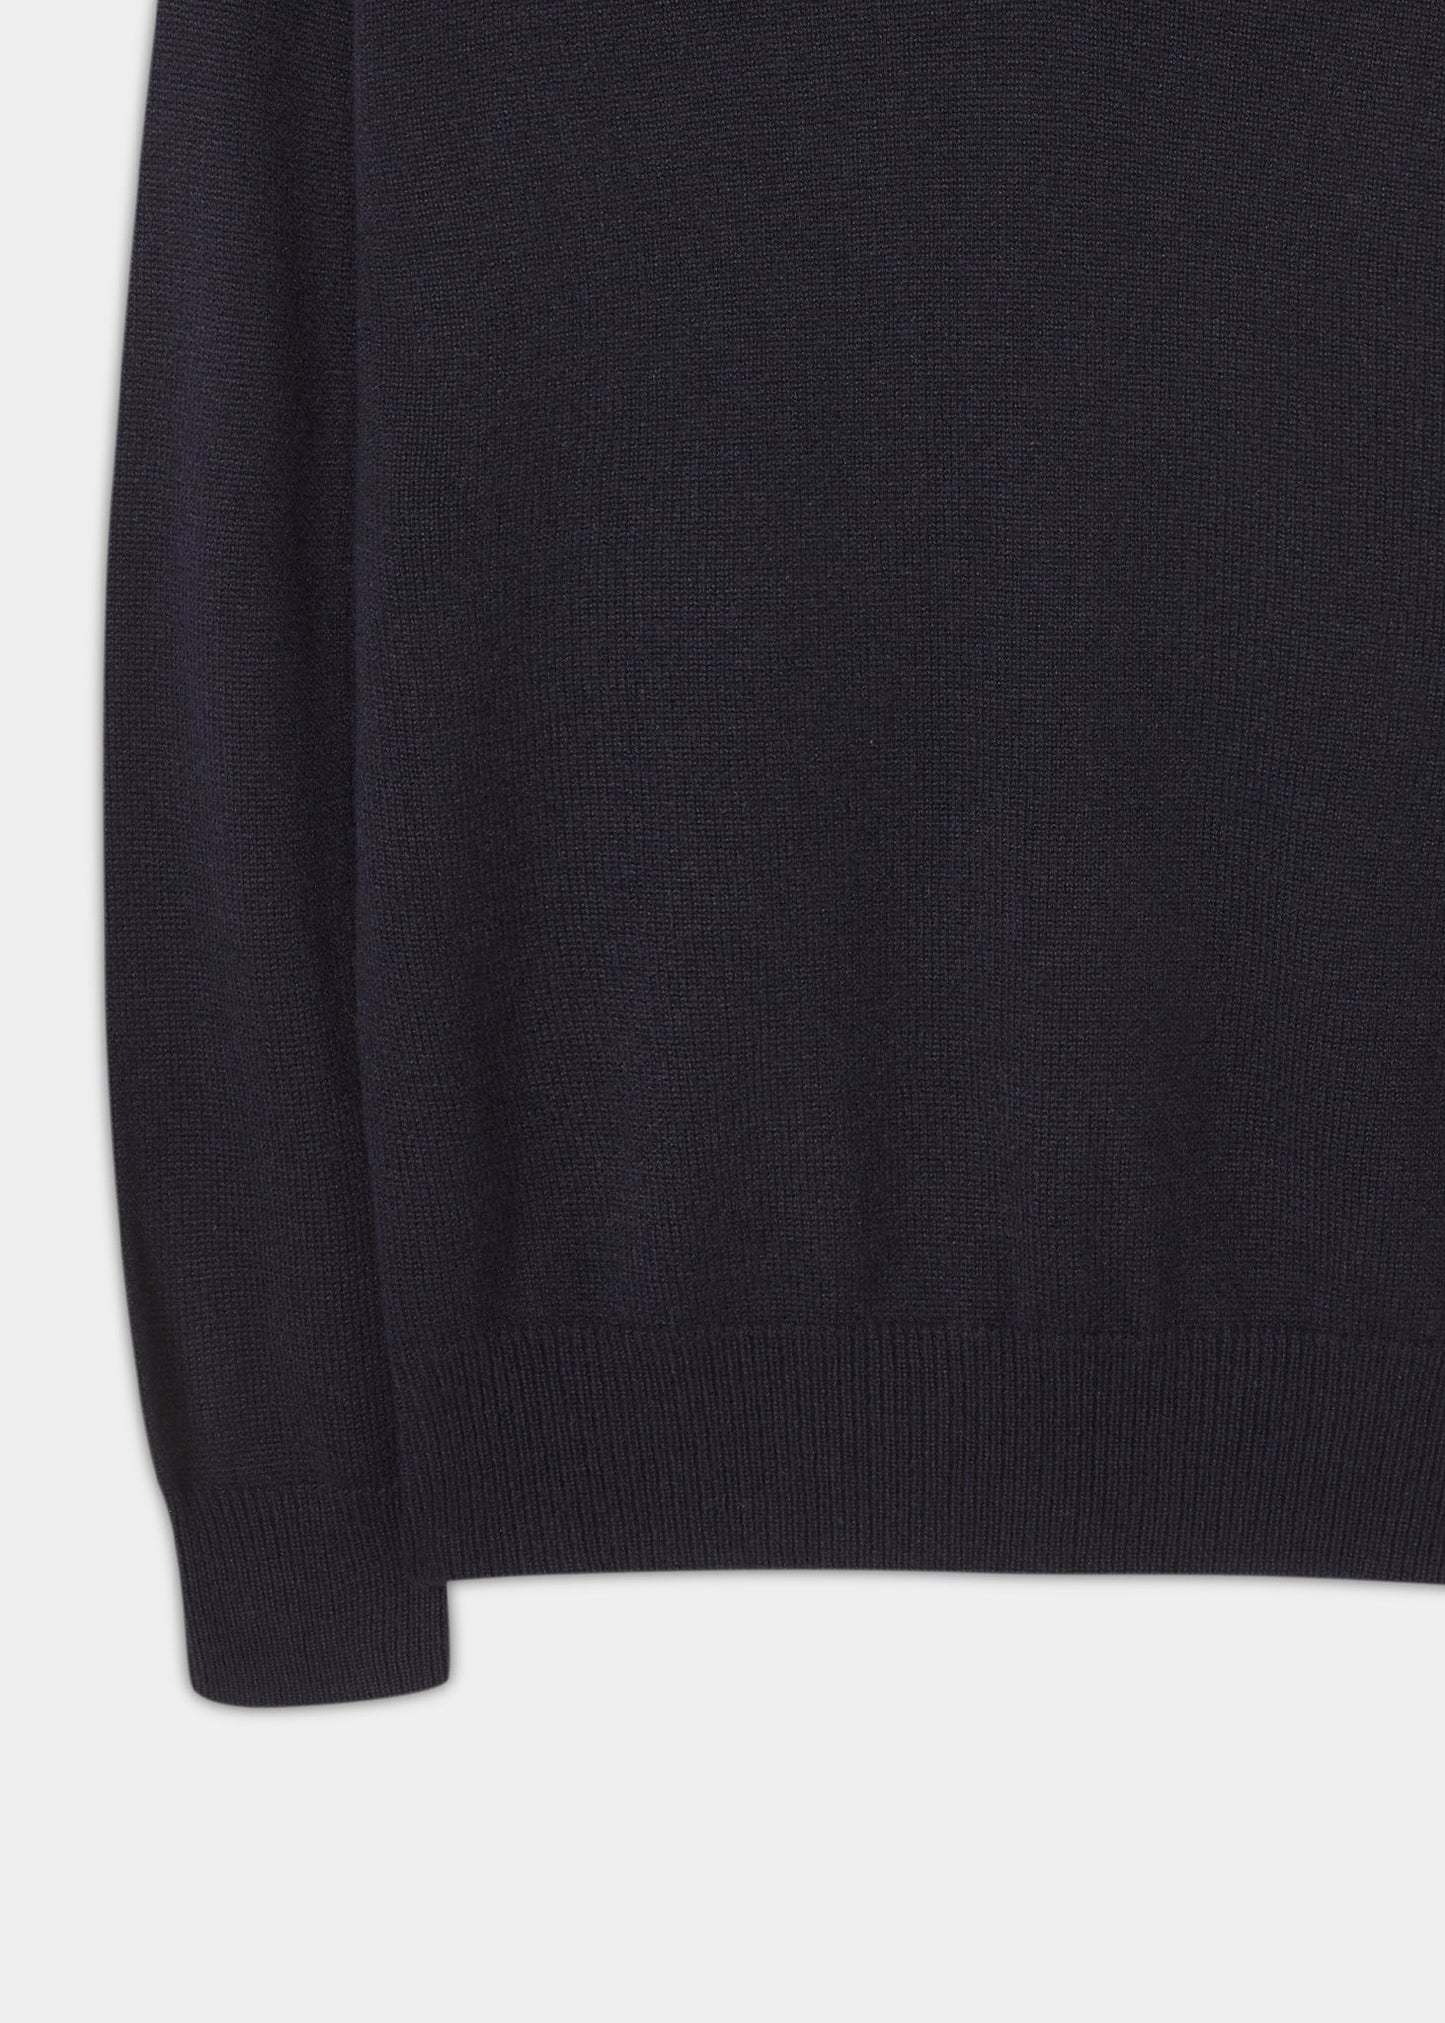 Selkirk Cashmere Sweater in Dark Navy - Classic Fit